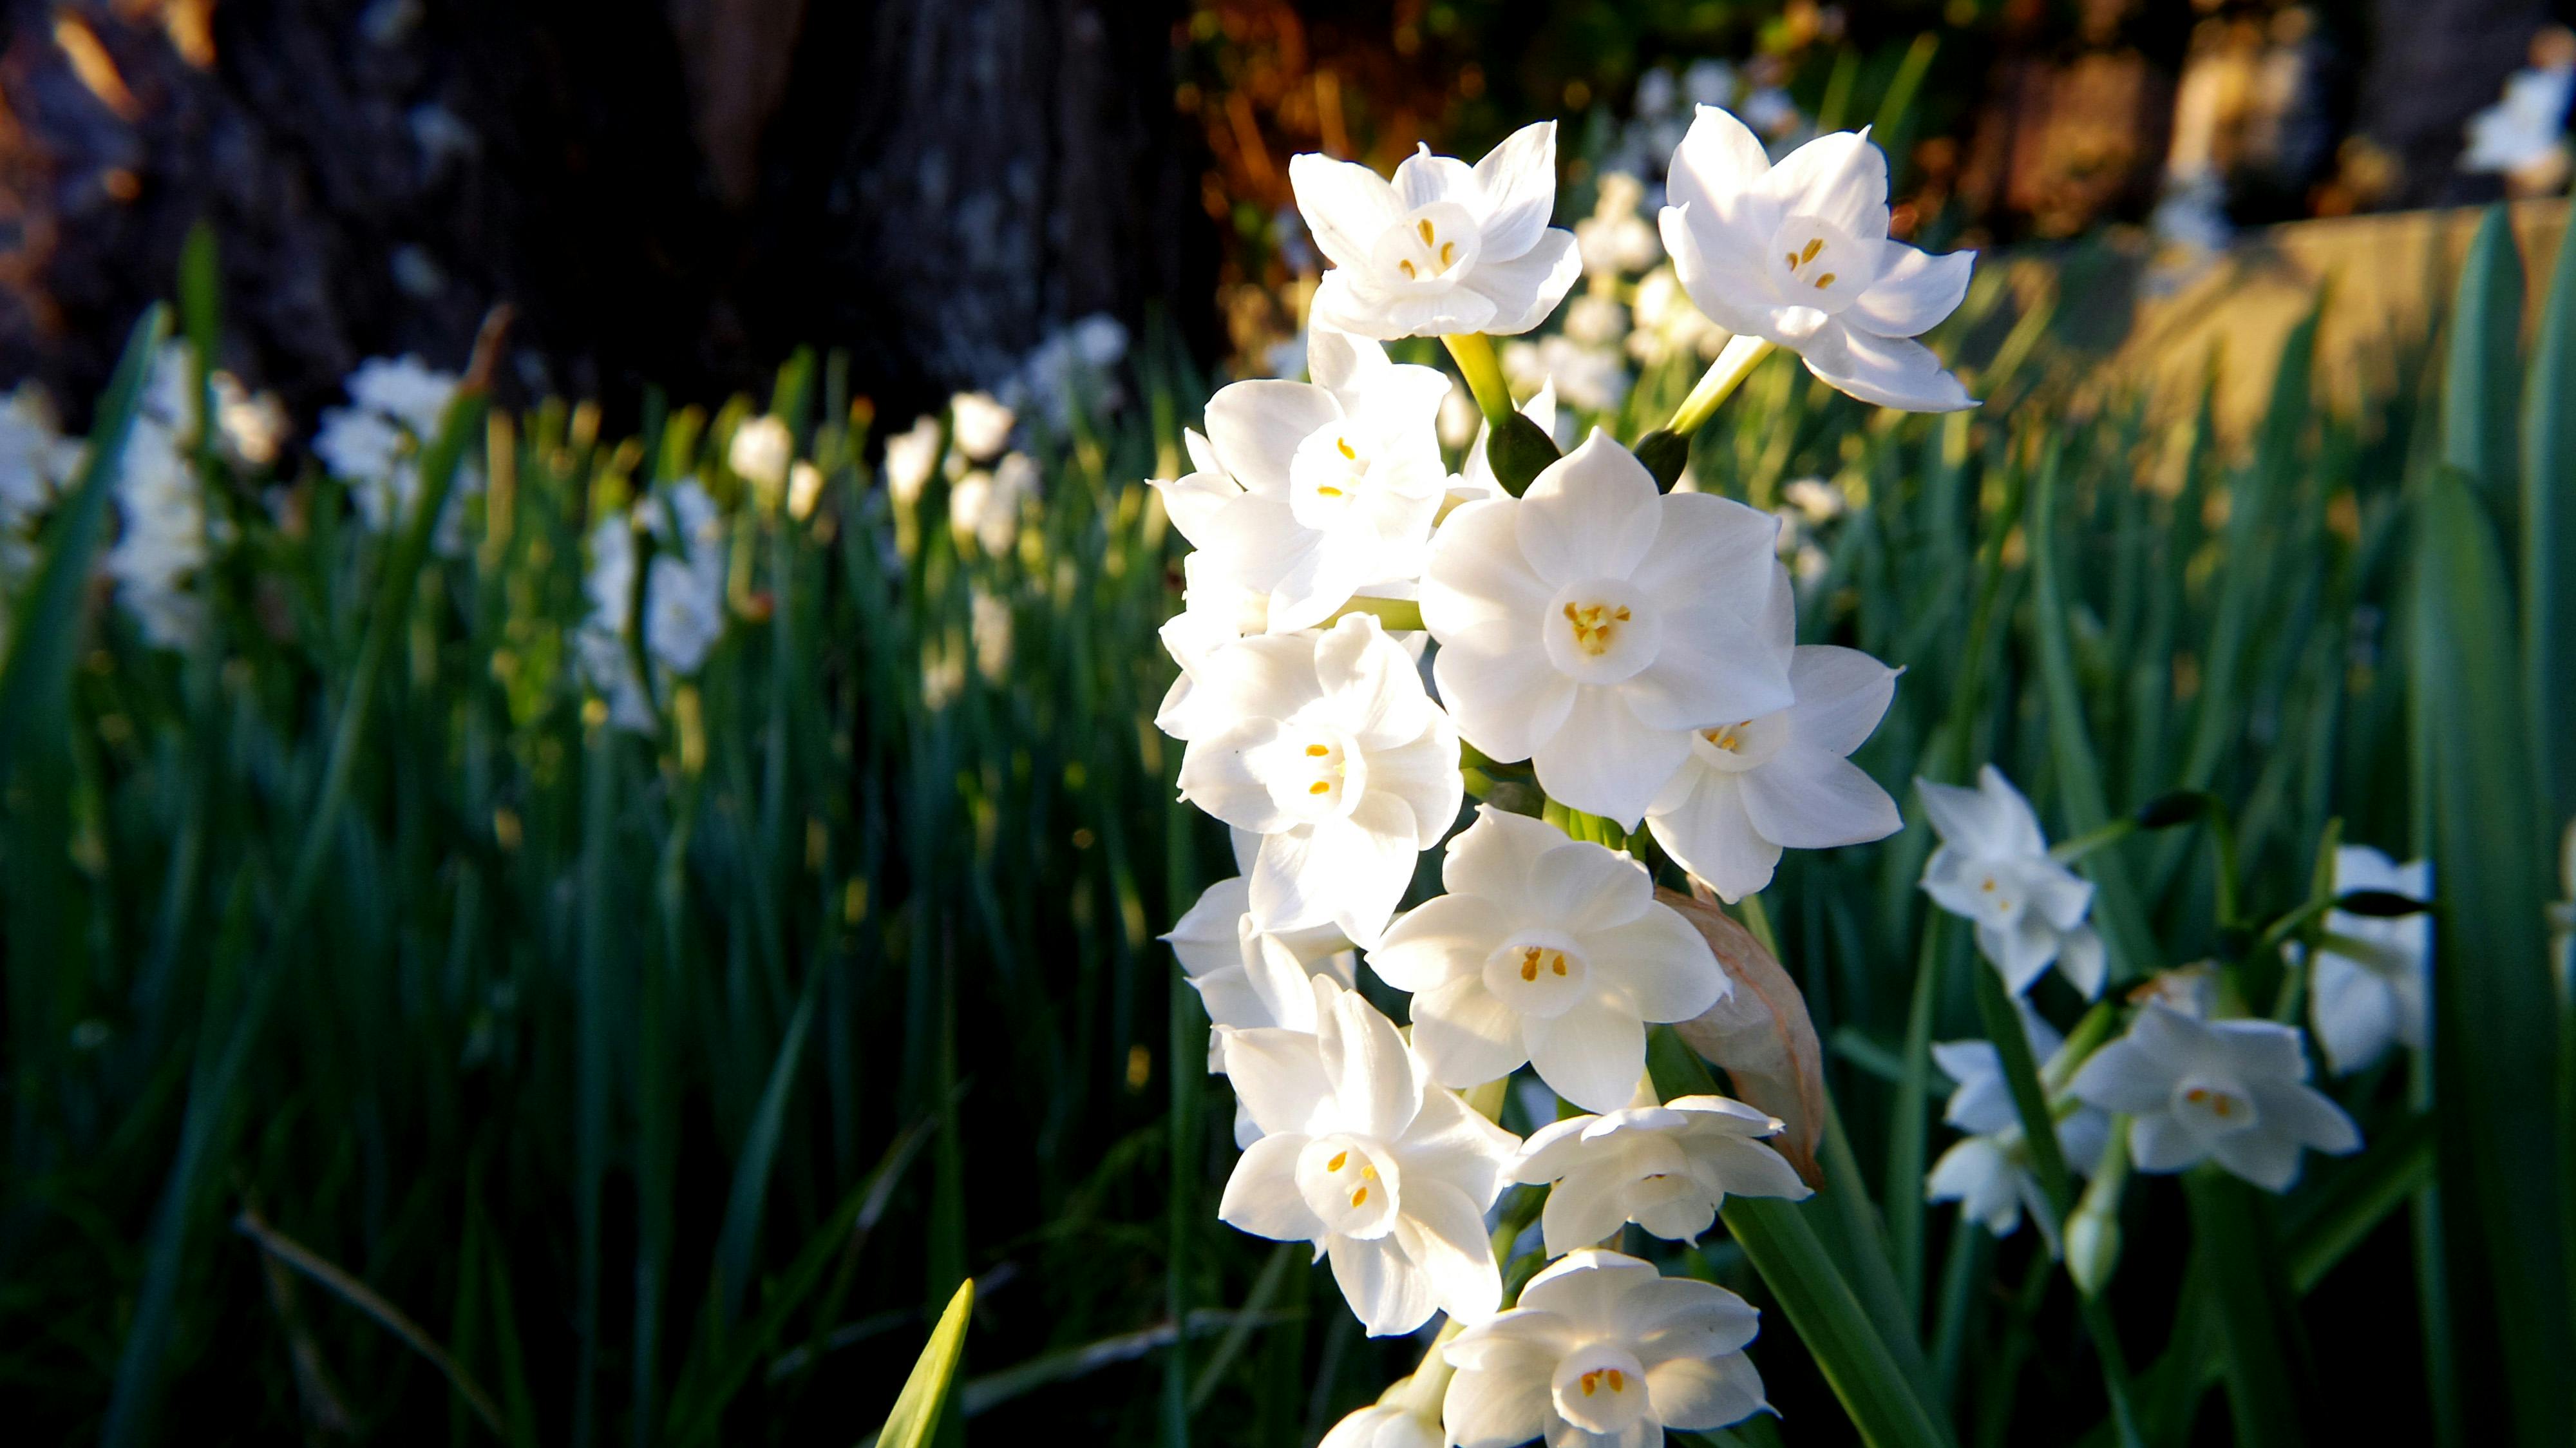 White Daffodil Flowers in Closeup Photography · Free Stock Photo